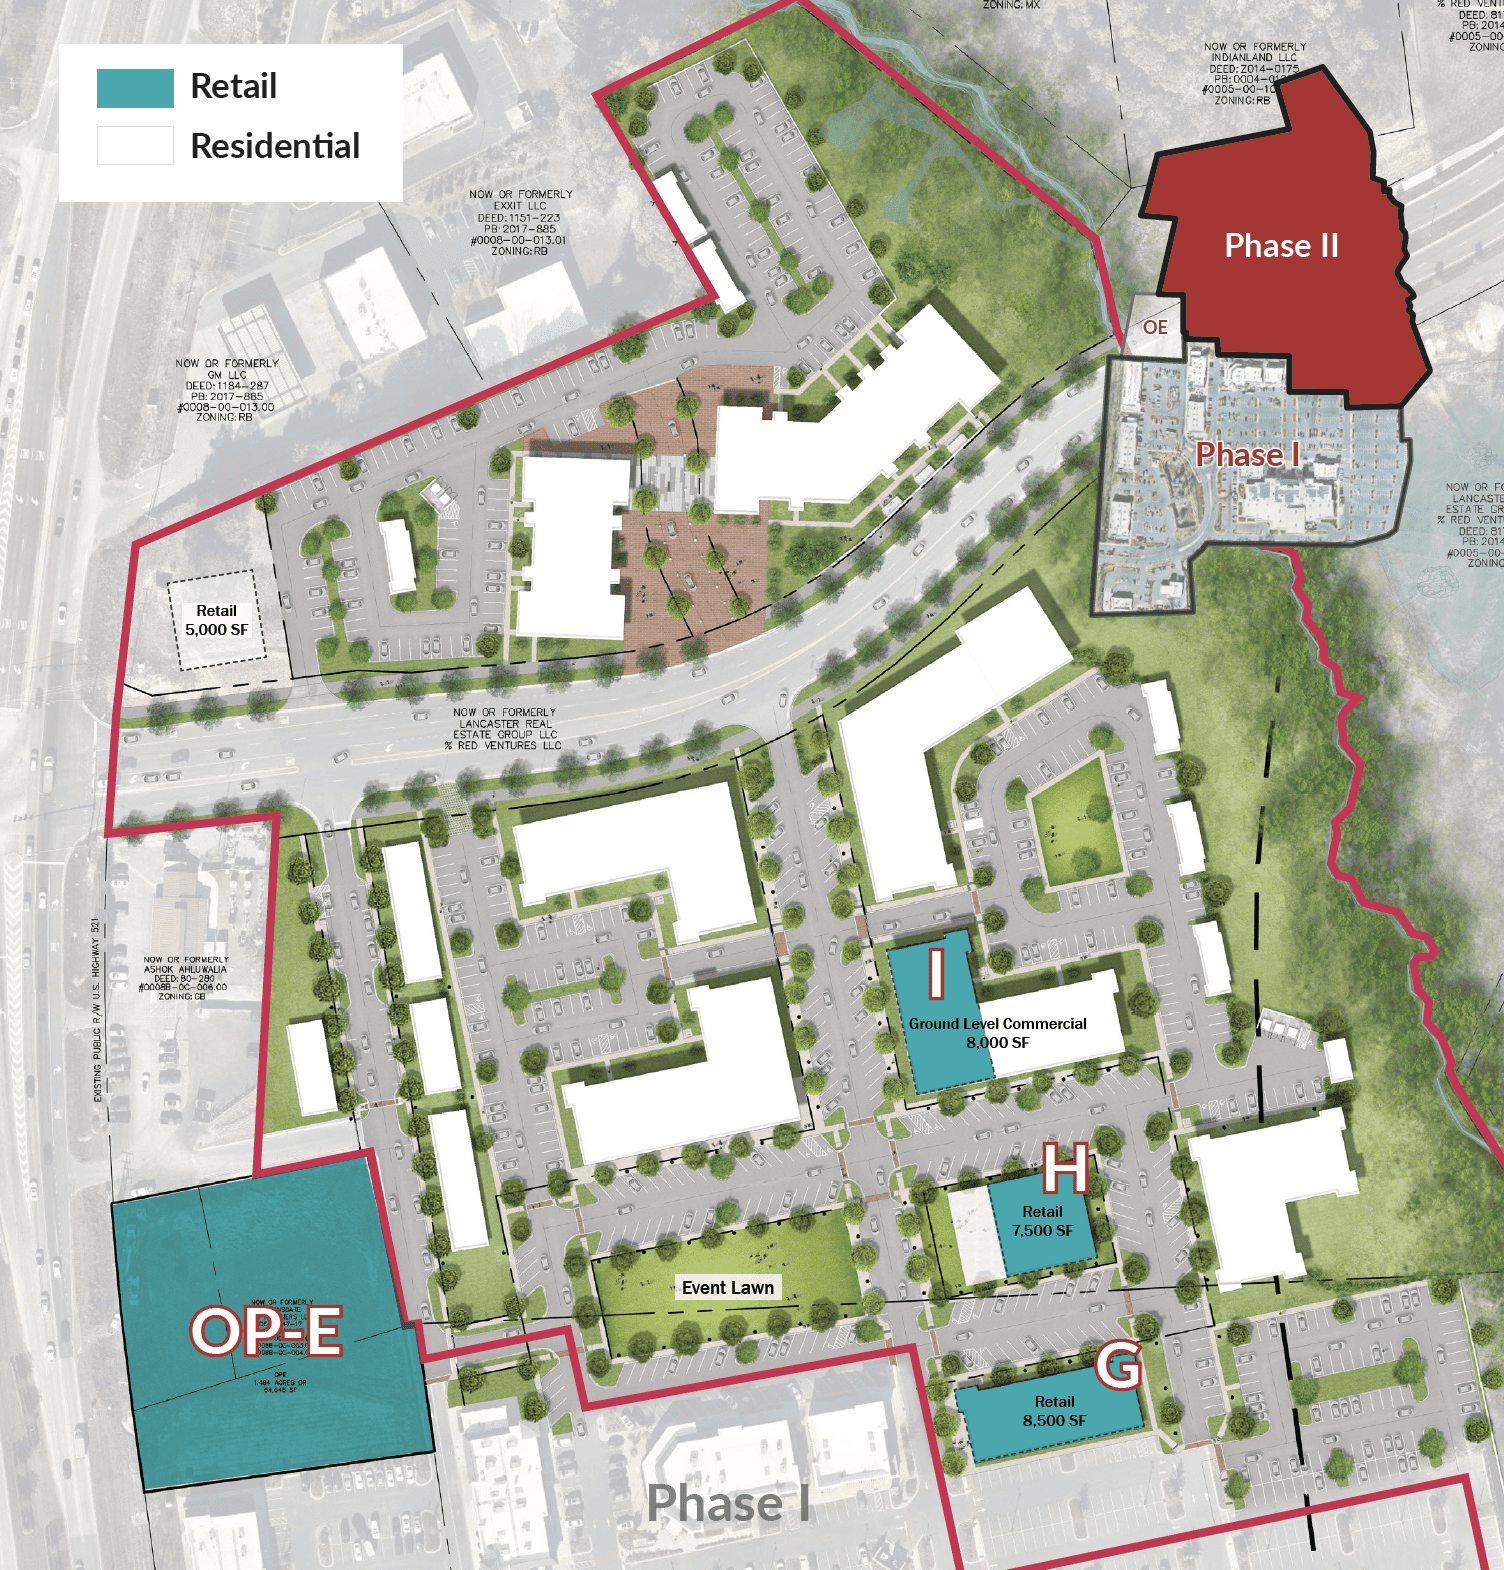 RedStone Phase II colored plan with residential and retail